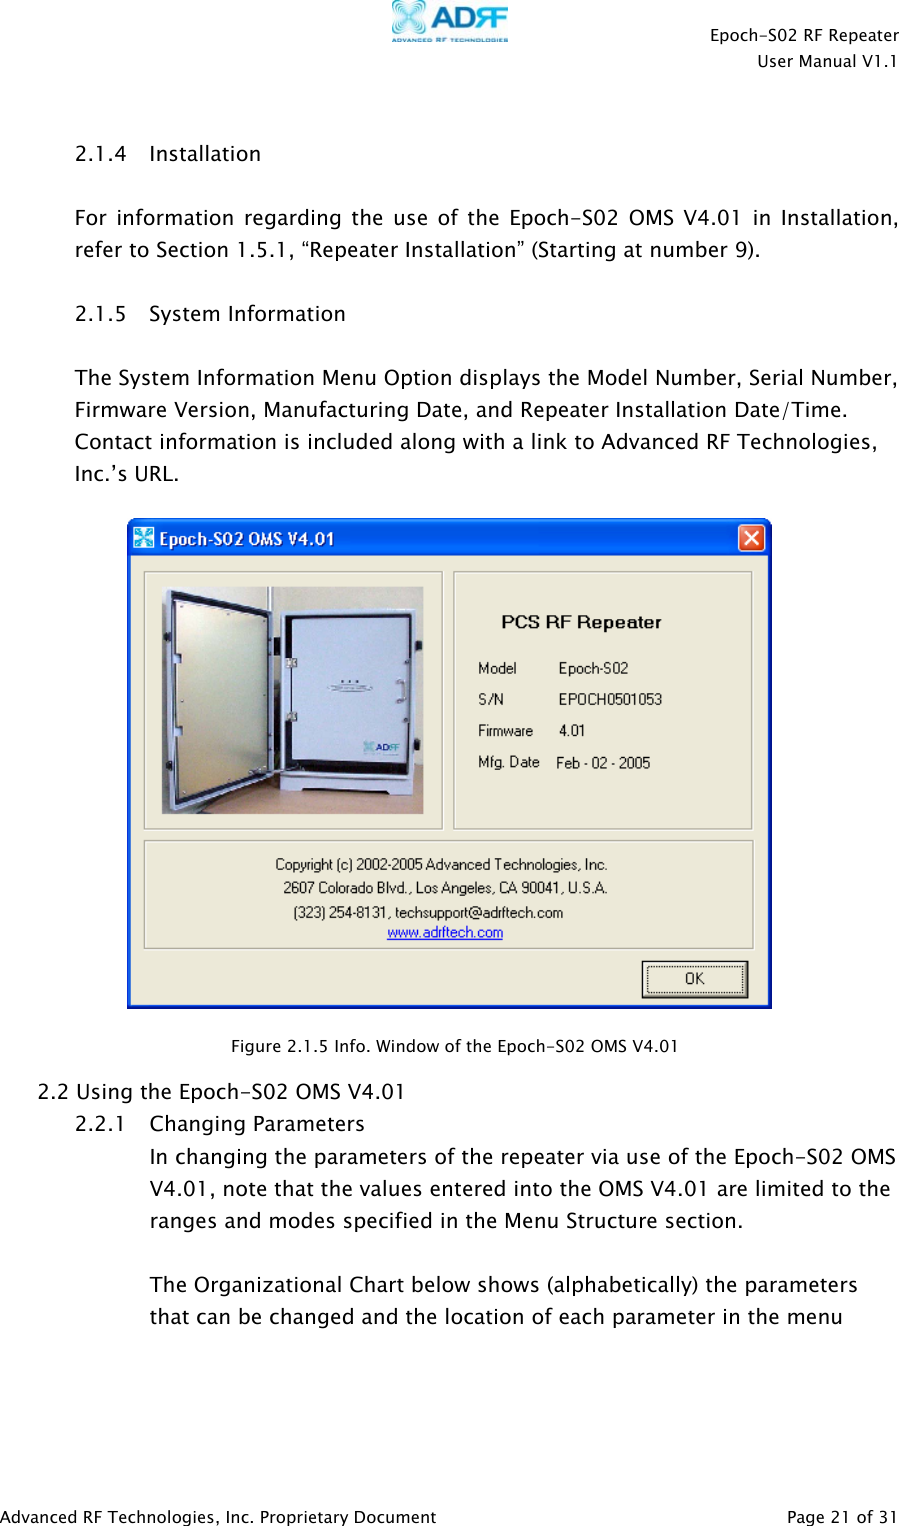    Epoch-S02 RF Repeater  User Manual V1.1   2.1.4 Installation  For information regarding the use of the Epoch-S02 OMS V4.01 in Installation, refer to Section 1.5.1, “Repeater Installation” (Starting at number 9).   2.1.5 System Information  The System Information Menu Option displays the Model Number, Serial Number, Firmware Version, Manufacturing Date, and Repeater Installation Date/Time.  Contact information is included along with a link to Advanced RF Technologies, Inc.’s URL.    Figure 2.1.5 Info. Window of the Epoch-S02 OMS V4.01 2.2 Using the Epoch-S02 OMS V4.01 2.2.1 Changing Parameters In changing the parameters of the repeater via use of the Epoch-S02 OMS V4.01, note that the values entered into the OMS V4.01 are limited to the ranges and modes specified in the Menu Structure section.  The Organizational Chart below shows (alphabetically) the parameters that can be changed and the location of each parameter in the menu     Advanced RF Technologies, Inc. Proprietary Document   Page 21 of 31  